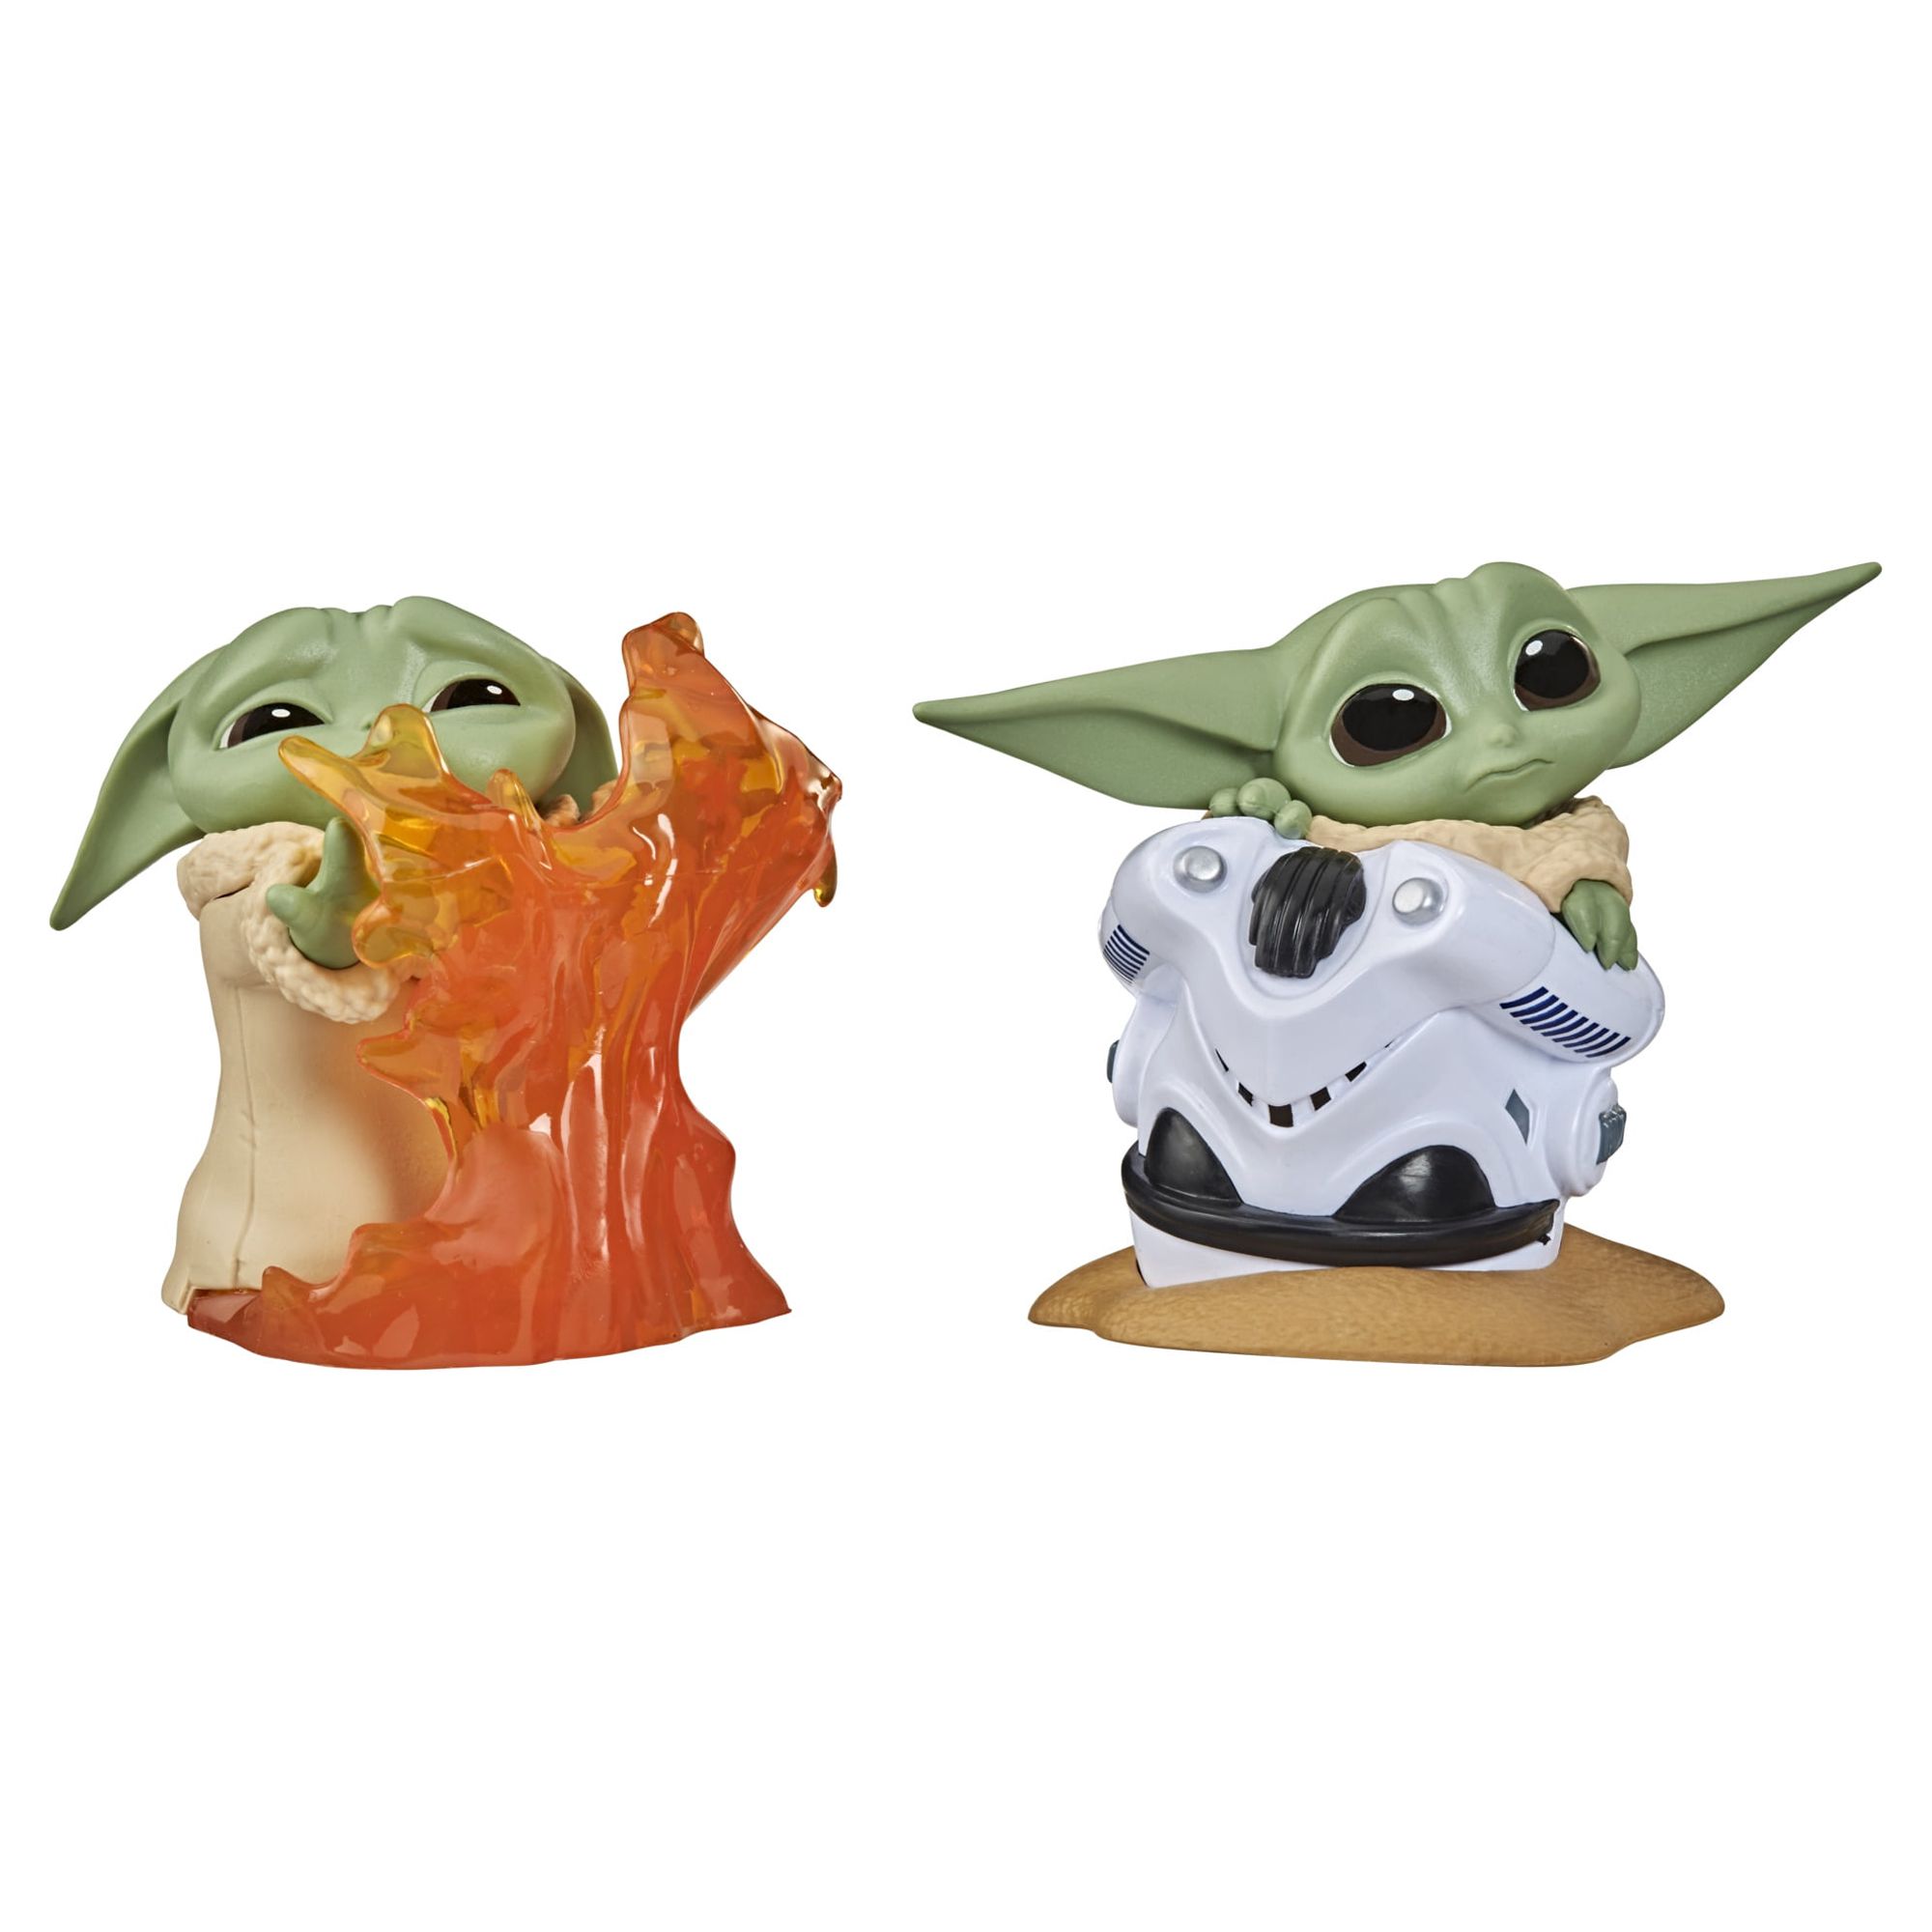 Star Wars: The Bounty Collection Series 2 the Child Helmet Hiding Pose Stopping Fire Pose Kids Toy Action Figure for Boys and Girls Ages 4 5 6 7 8 and Up - image 1 of 7